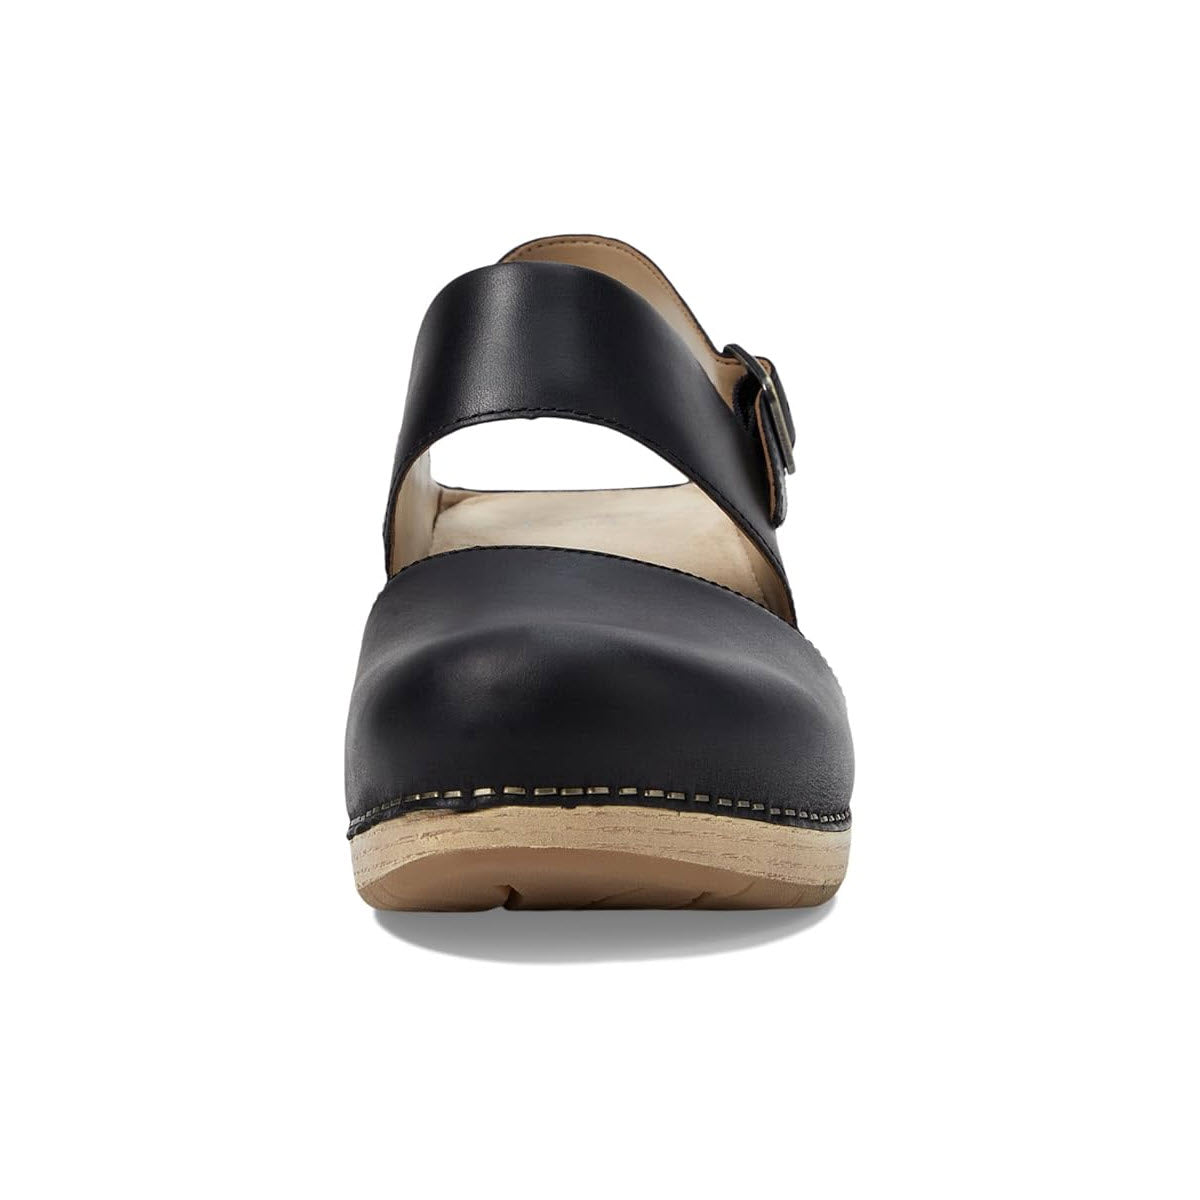 Front view of a Dansko Lucia Black womens shoe with a closed toe, adjustable heel strap, and a layered wooden heel.